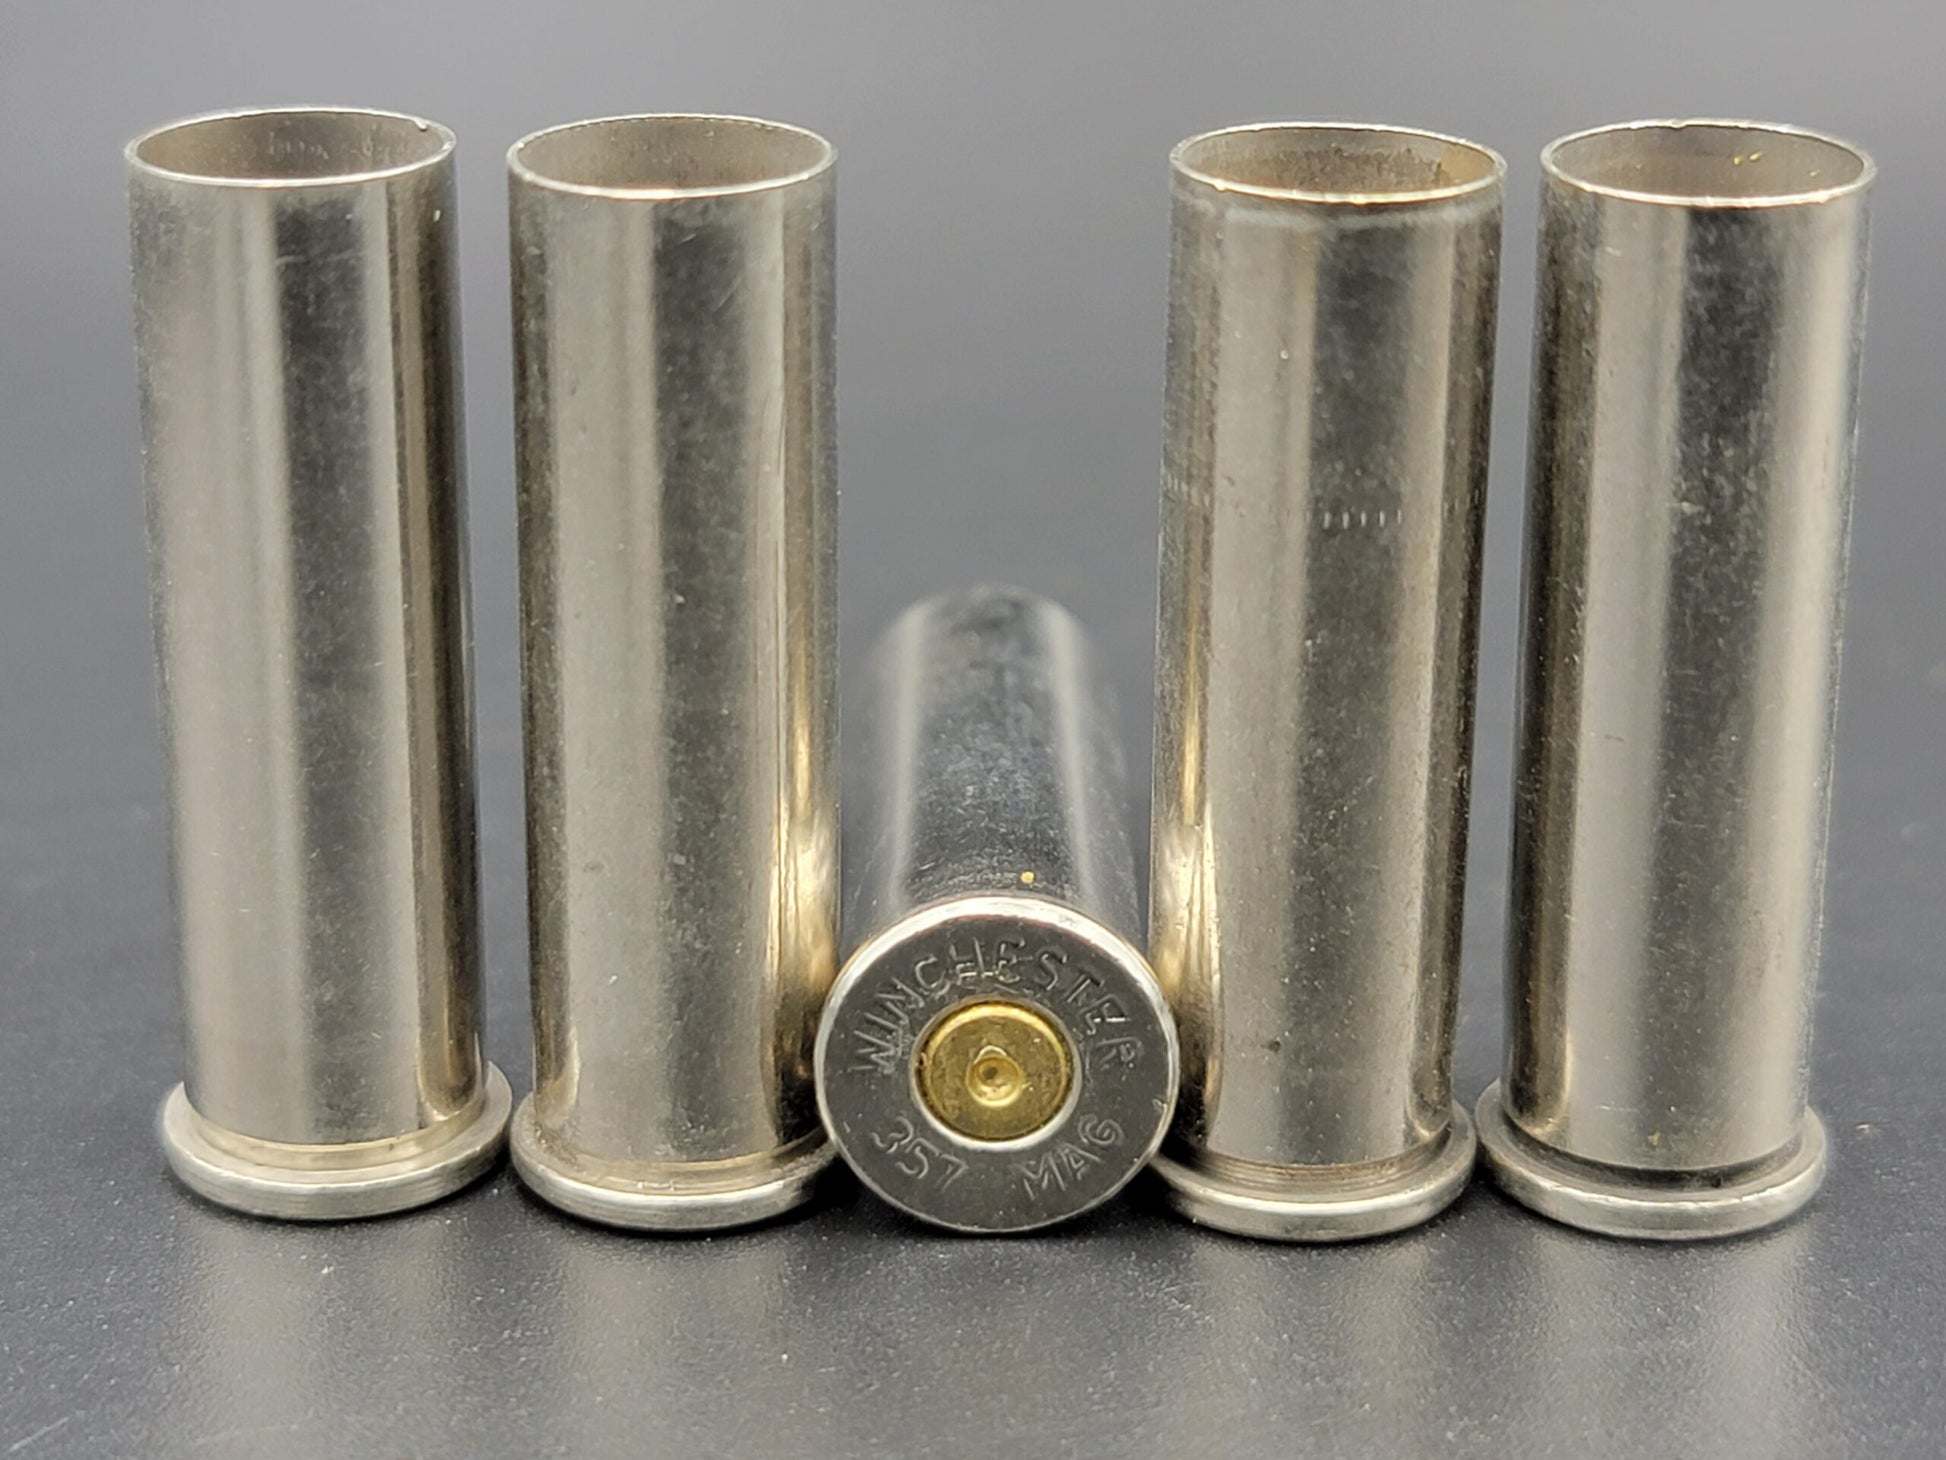 357 Mag once fired pistol nickel. Hand sorted from reputable indoor/military ranges for reloading. Reliable spent casings for precision shooting.